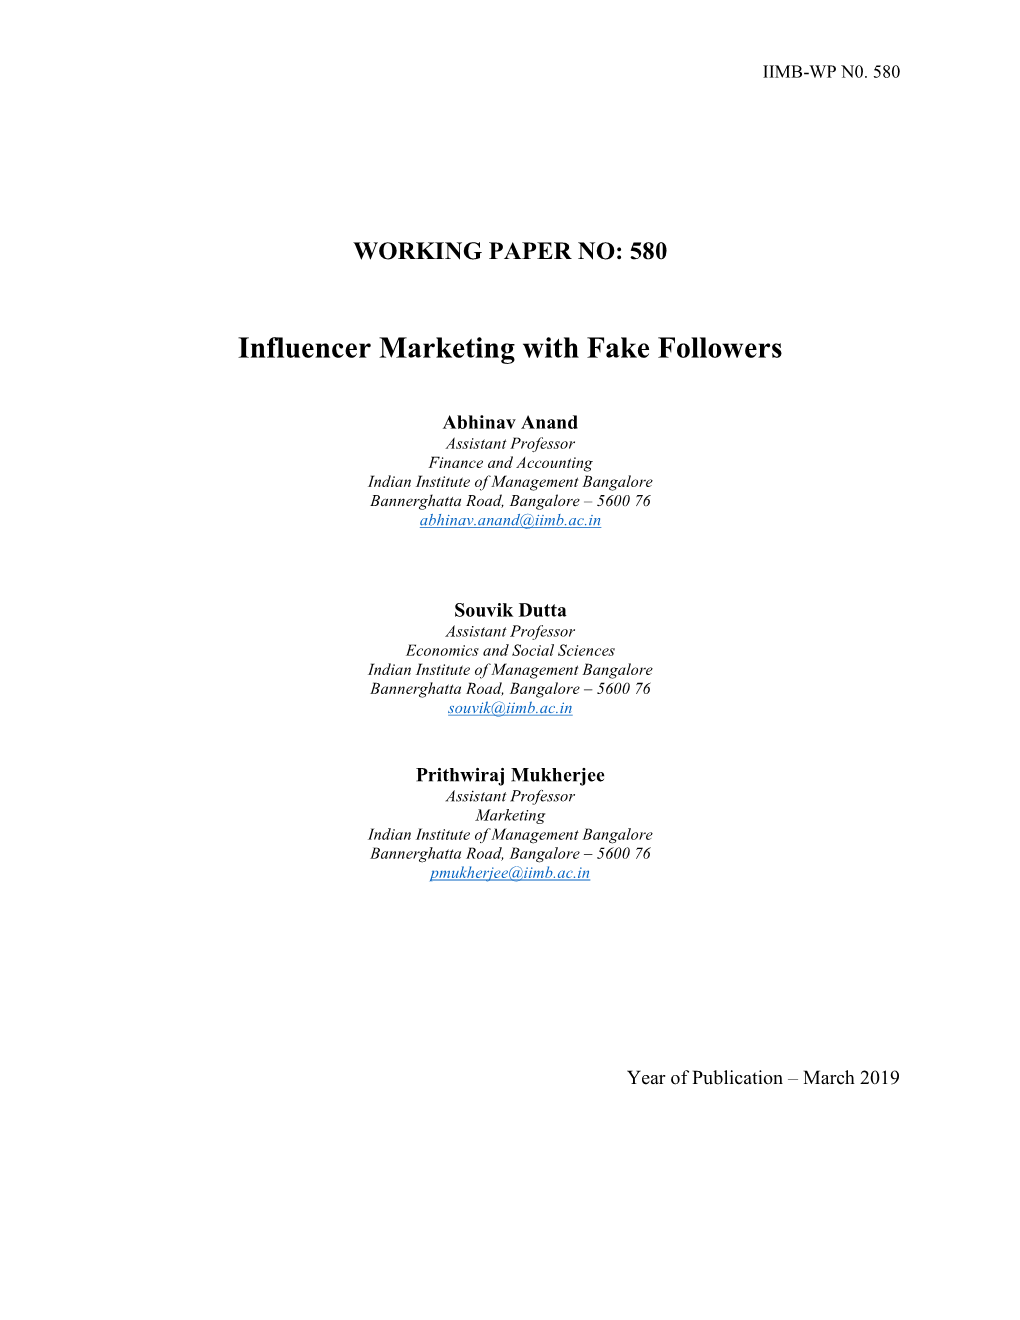 Influencer Marketing with Fake Followers